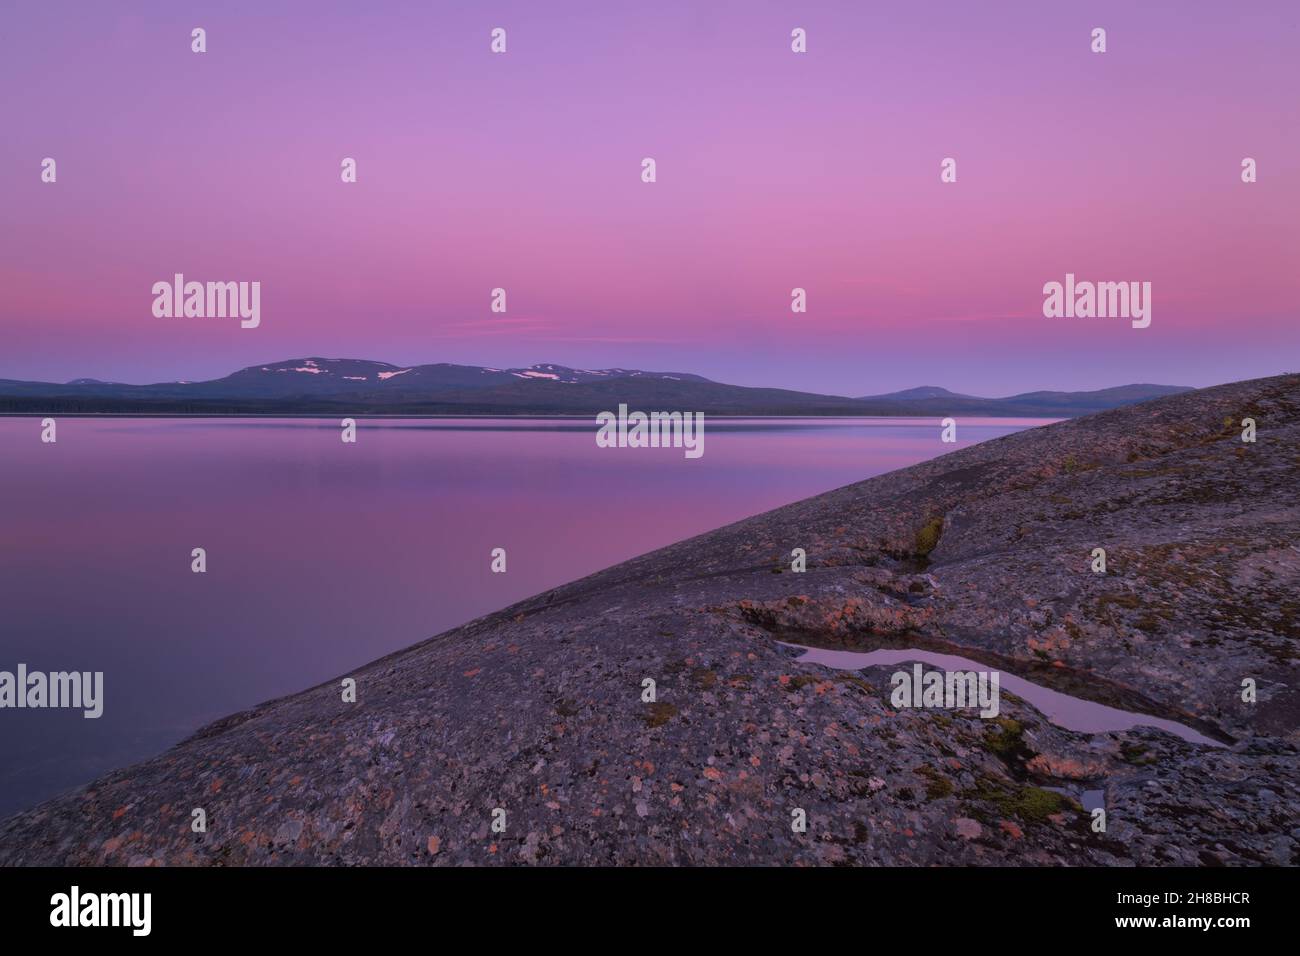 rocks in water with little snow left on mountains during sunset reflected in water Stock Photo